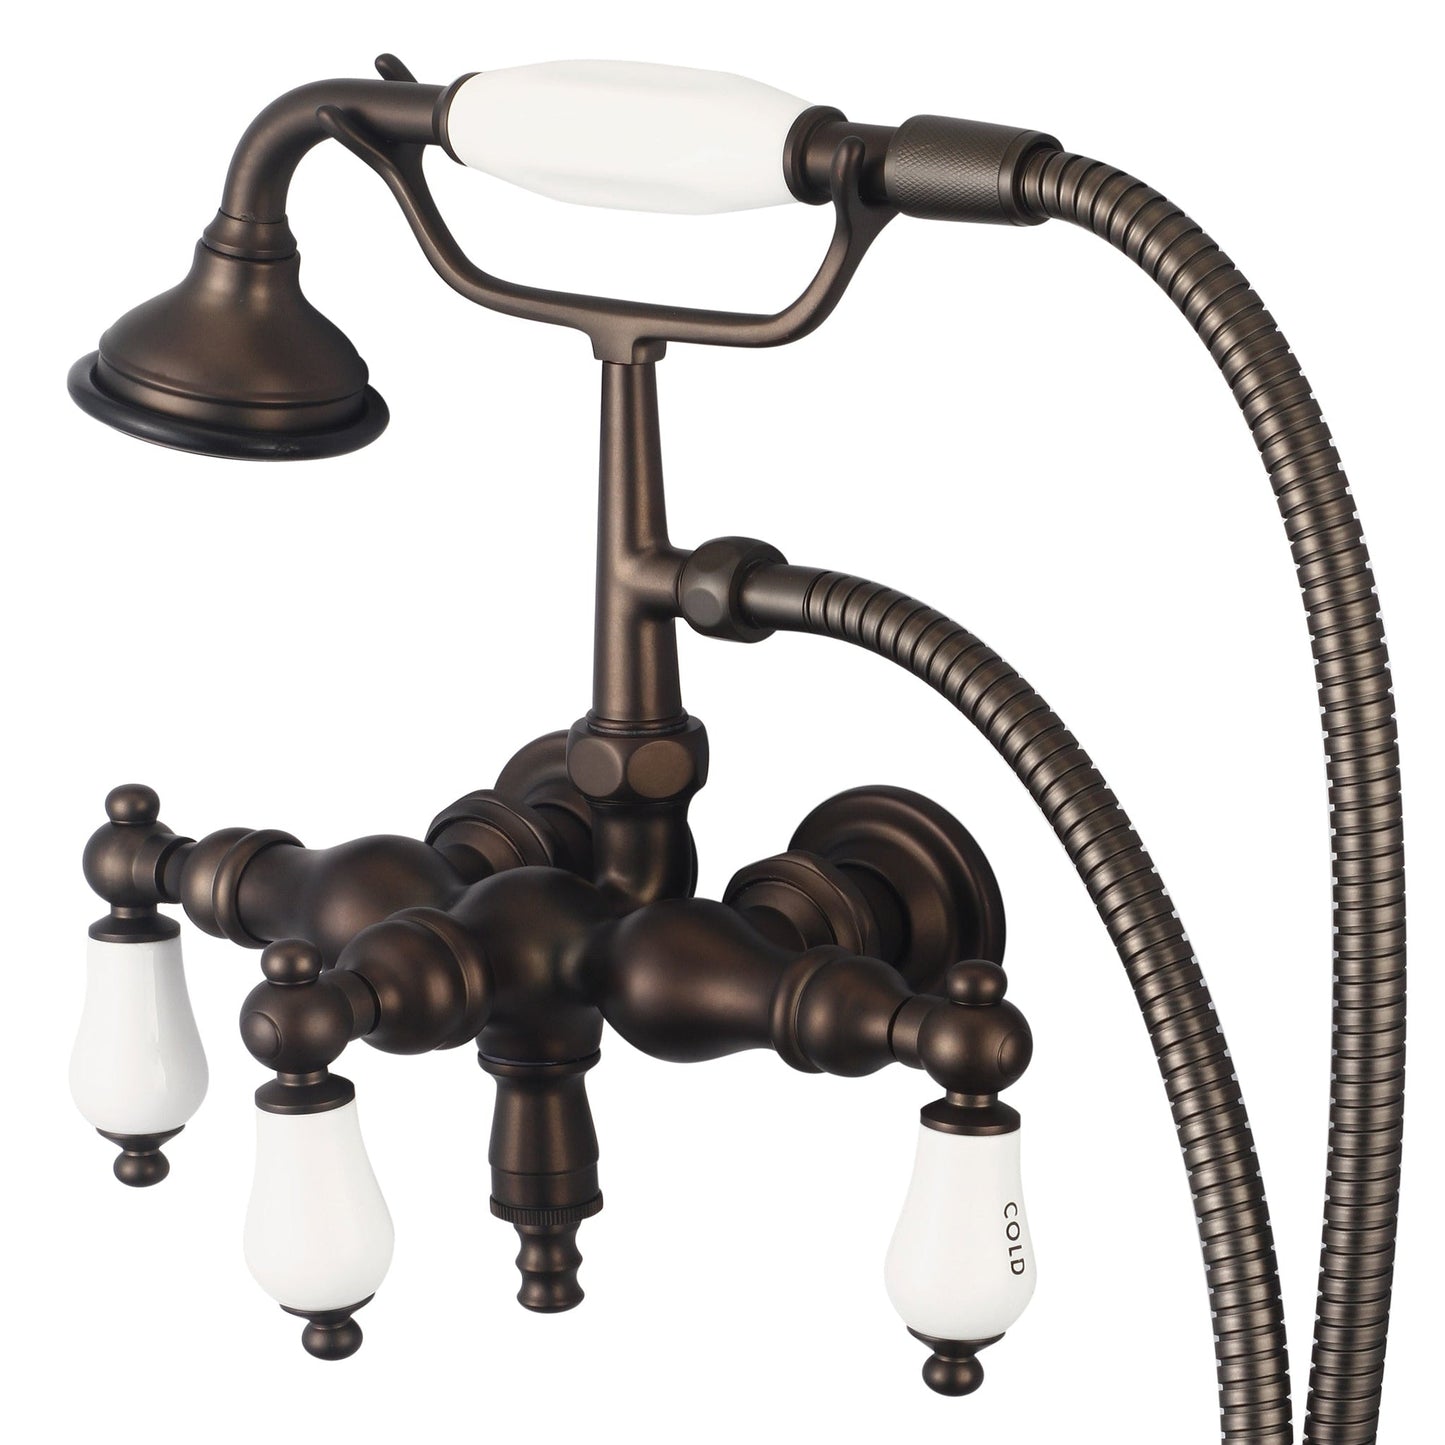 Water Creation Vintage Classic Center Wall Mount Tub F6-0017 9.25" Brown Solid Brass Faucet With Down Spout, Straight Wall Connector And Handheld Shower And Porcelain Lever Handles, Hot And Cold Labels Included